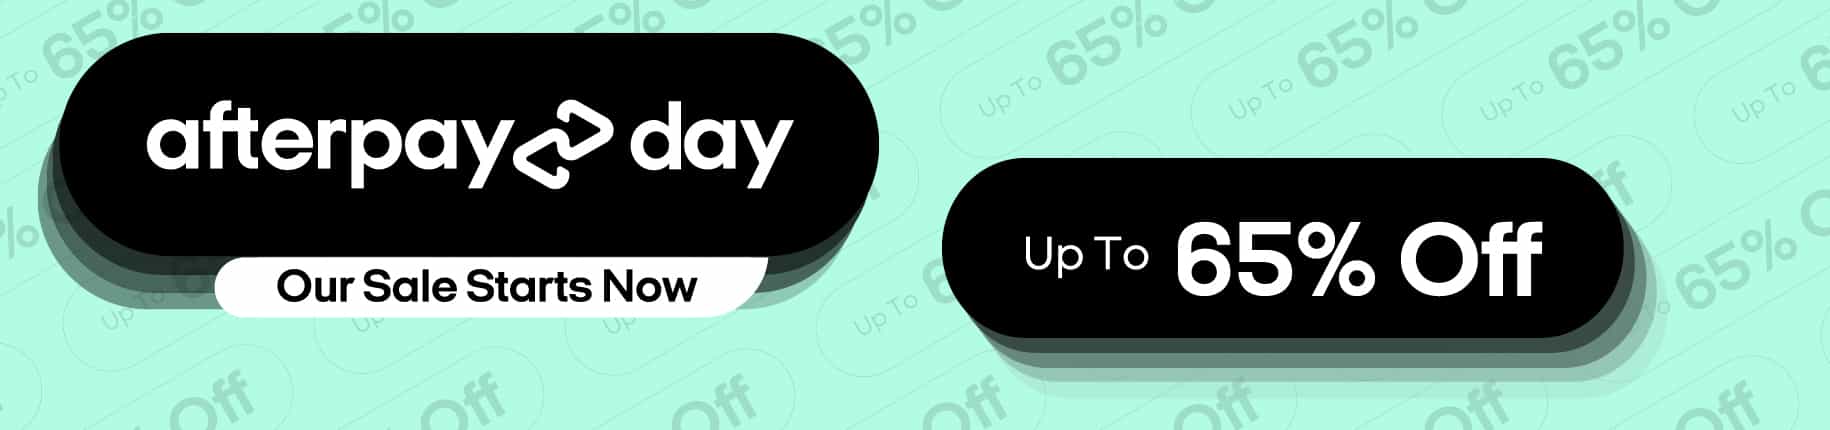 Afterpay Day sale - Up to 65% OFF on grooming items